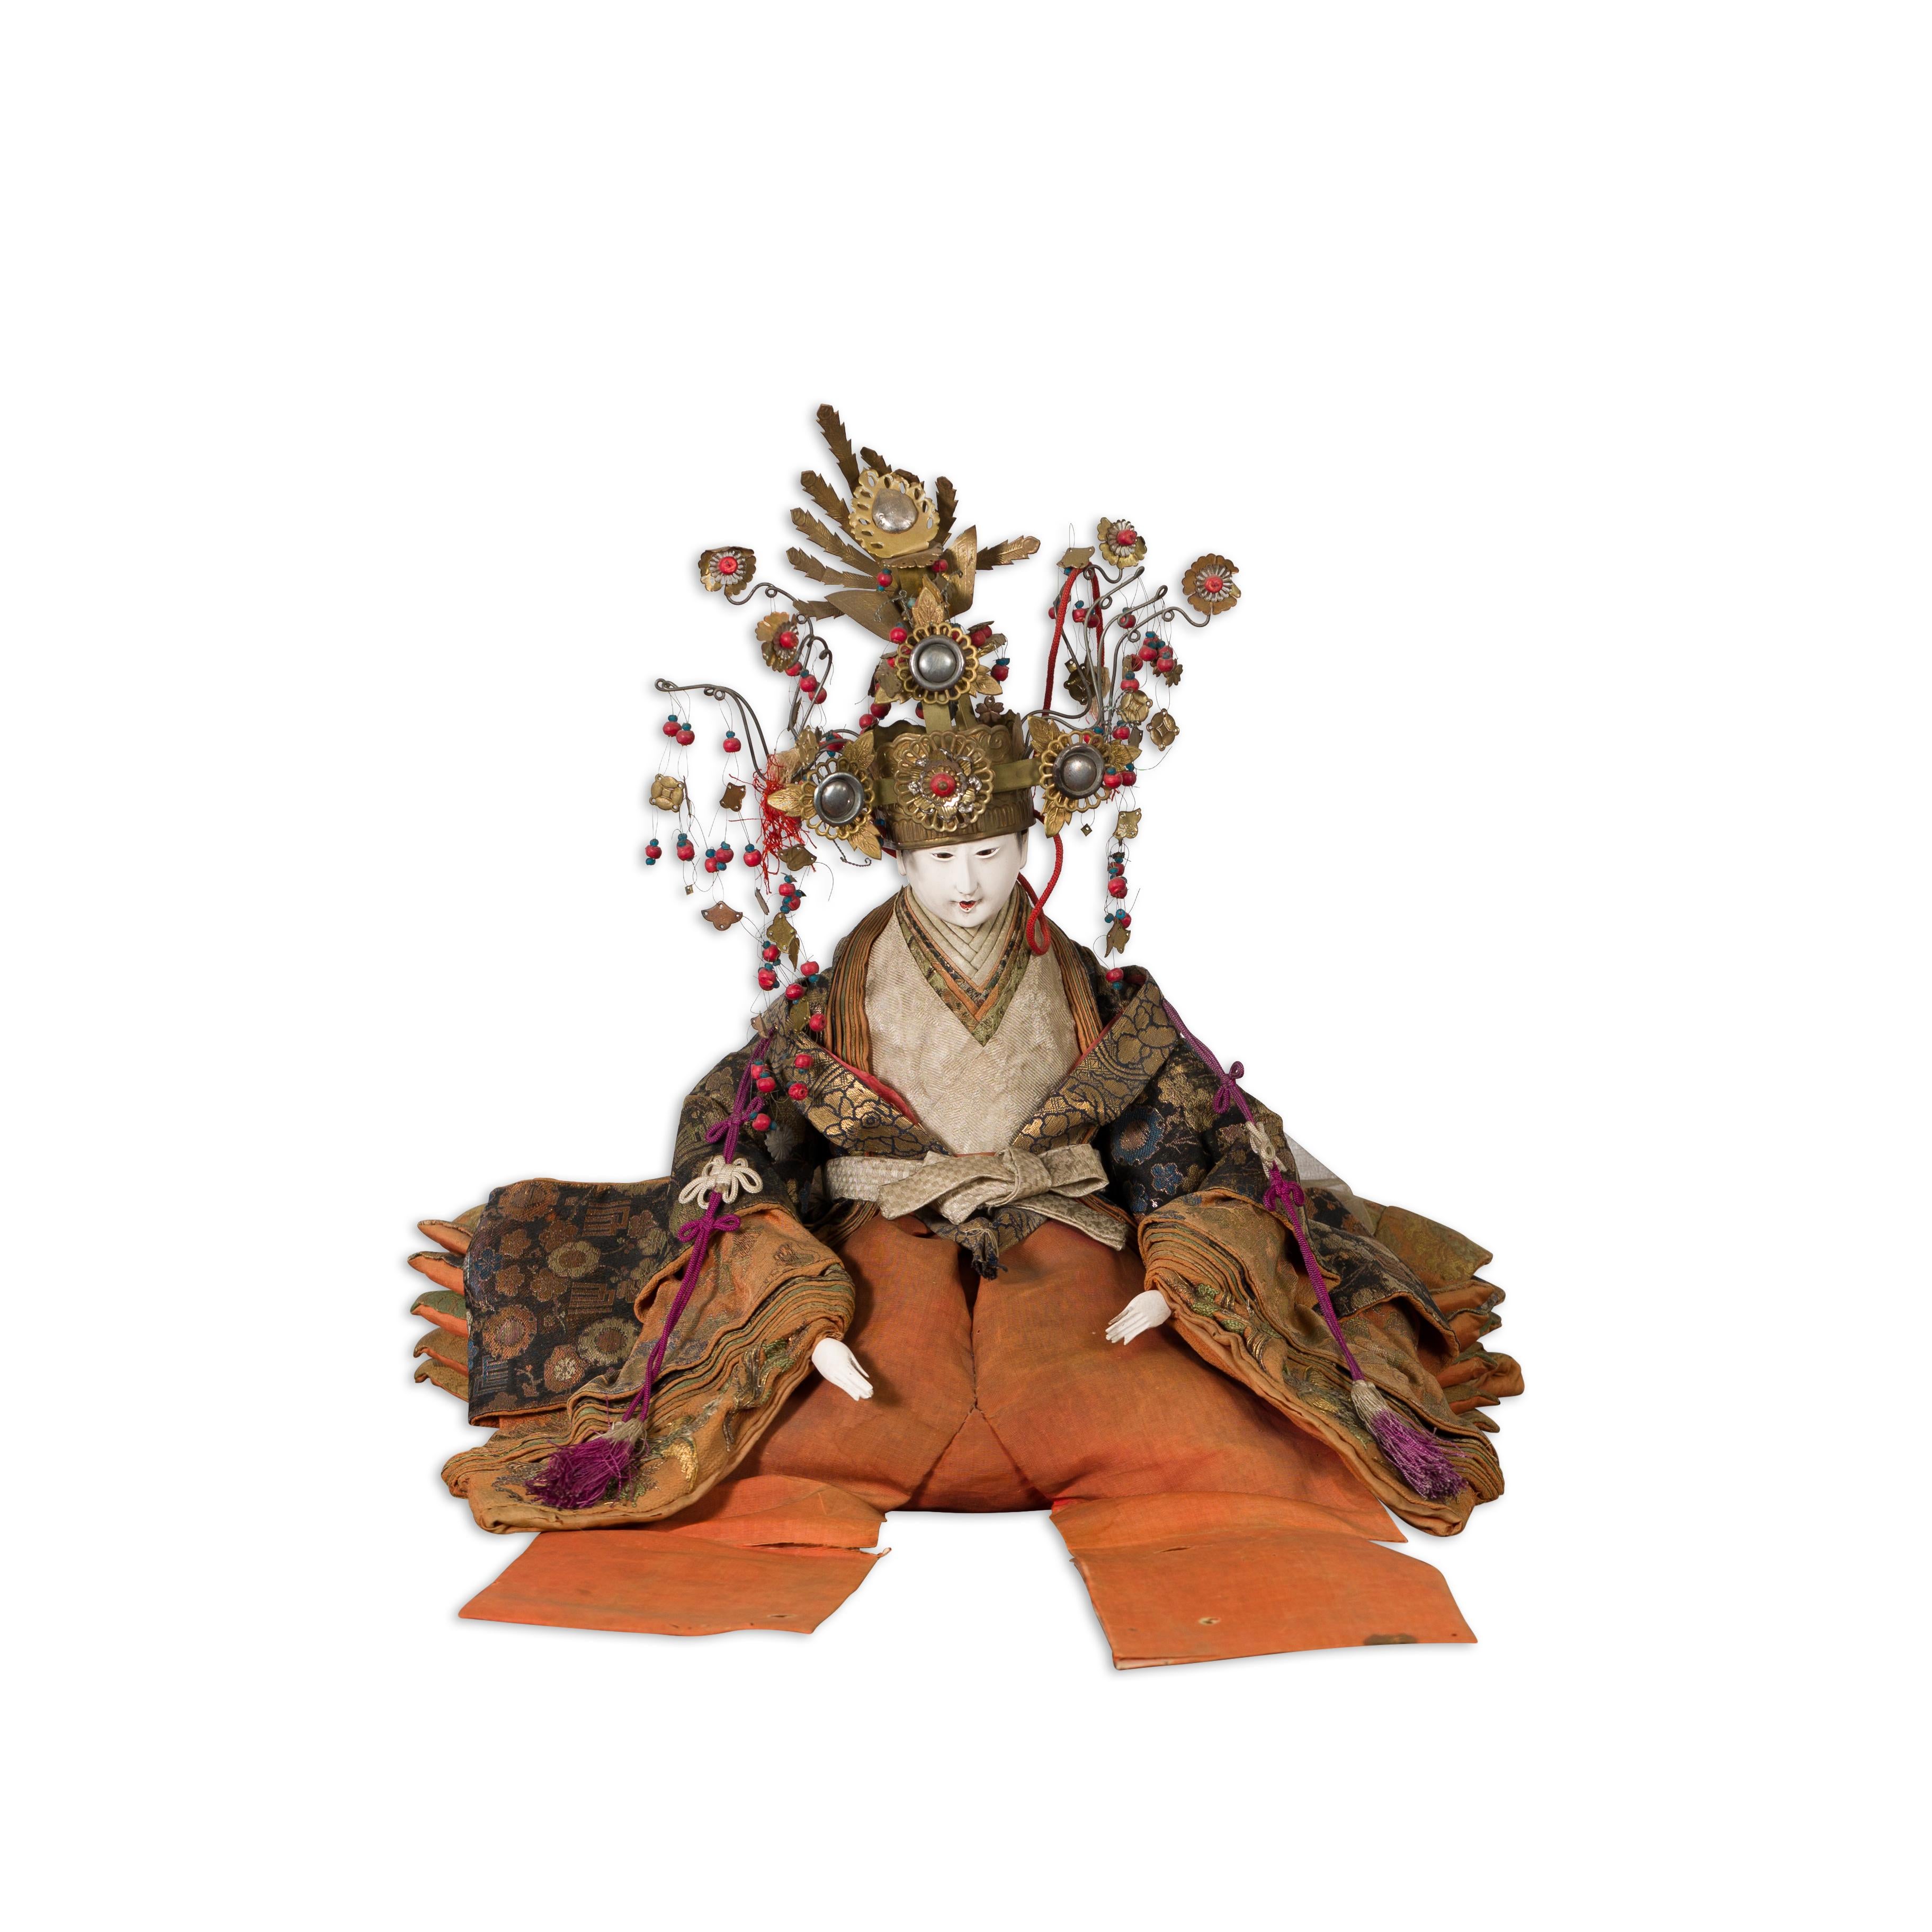 Japanese Taisho Period Sitting Doll with Silk Clothing and Ornate Headdress For Sale 9